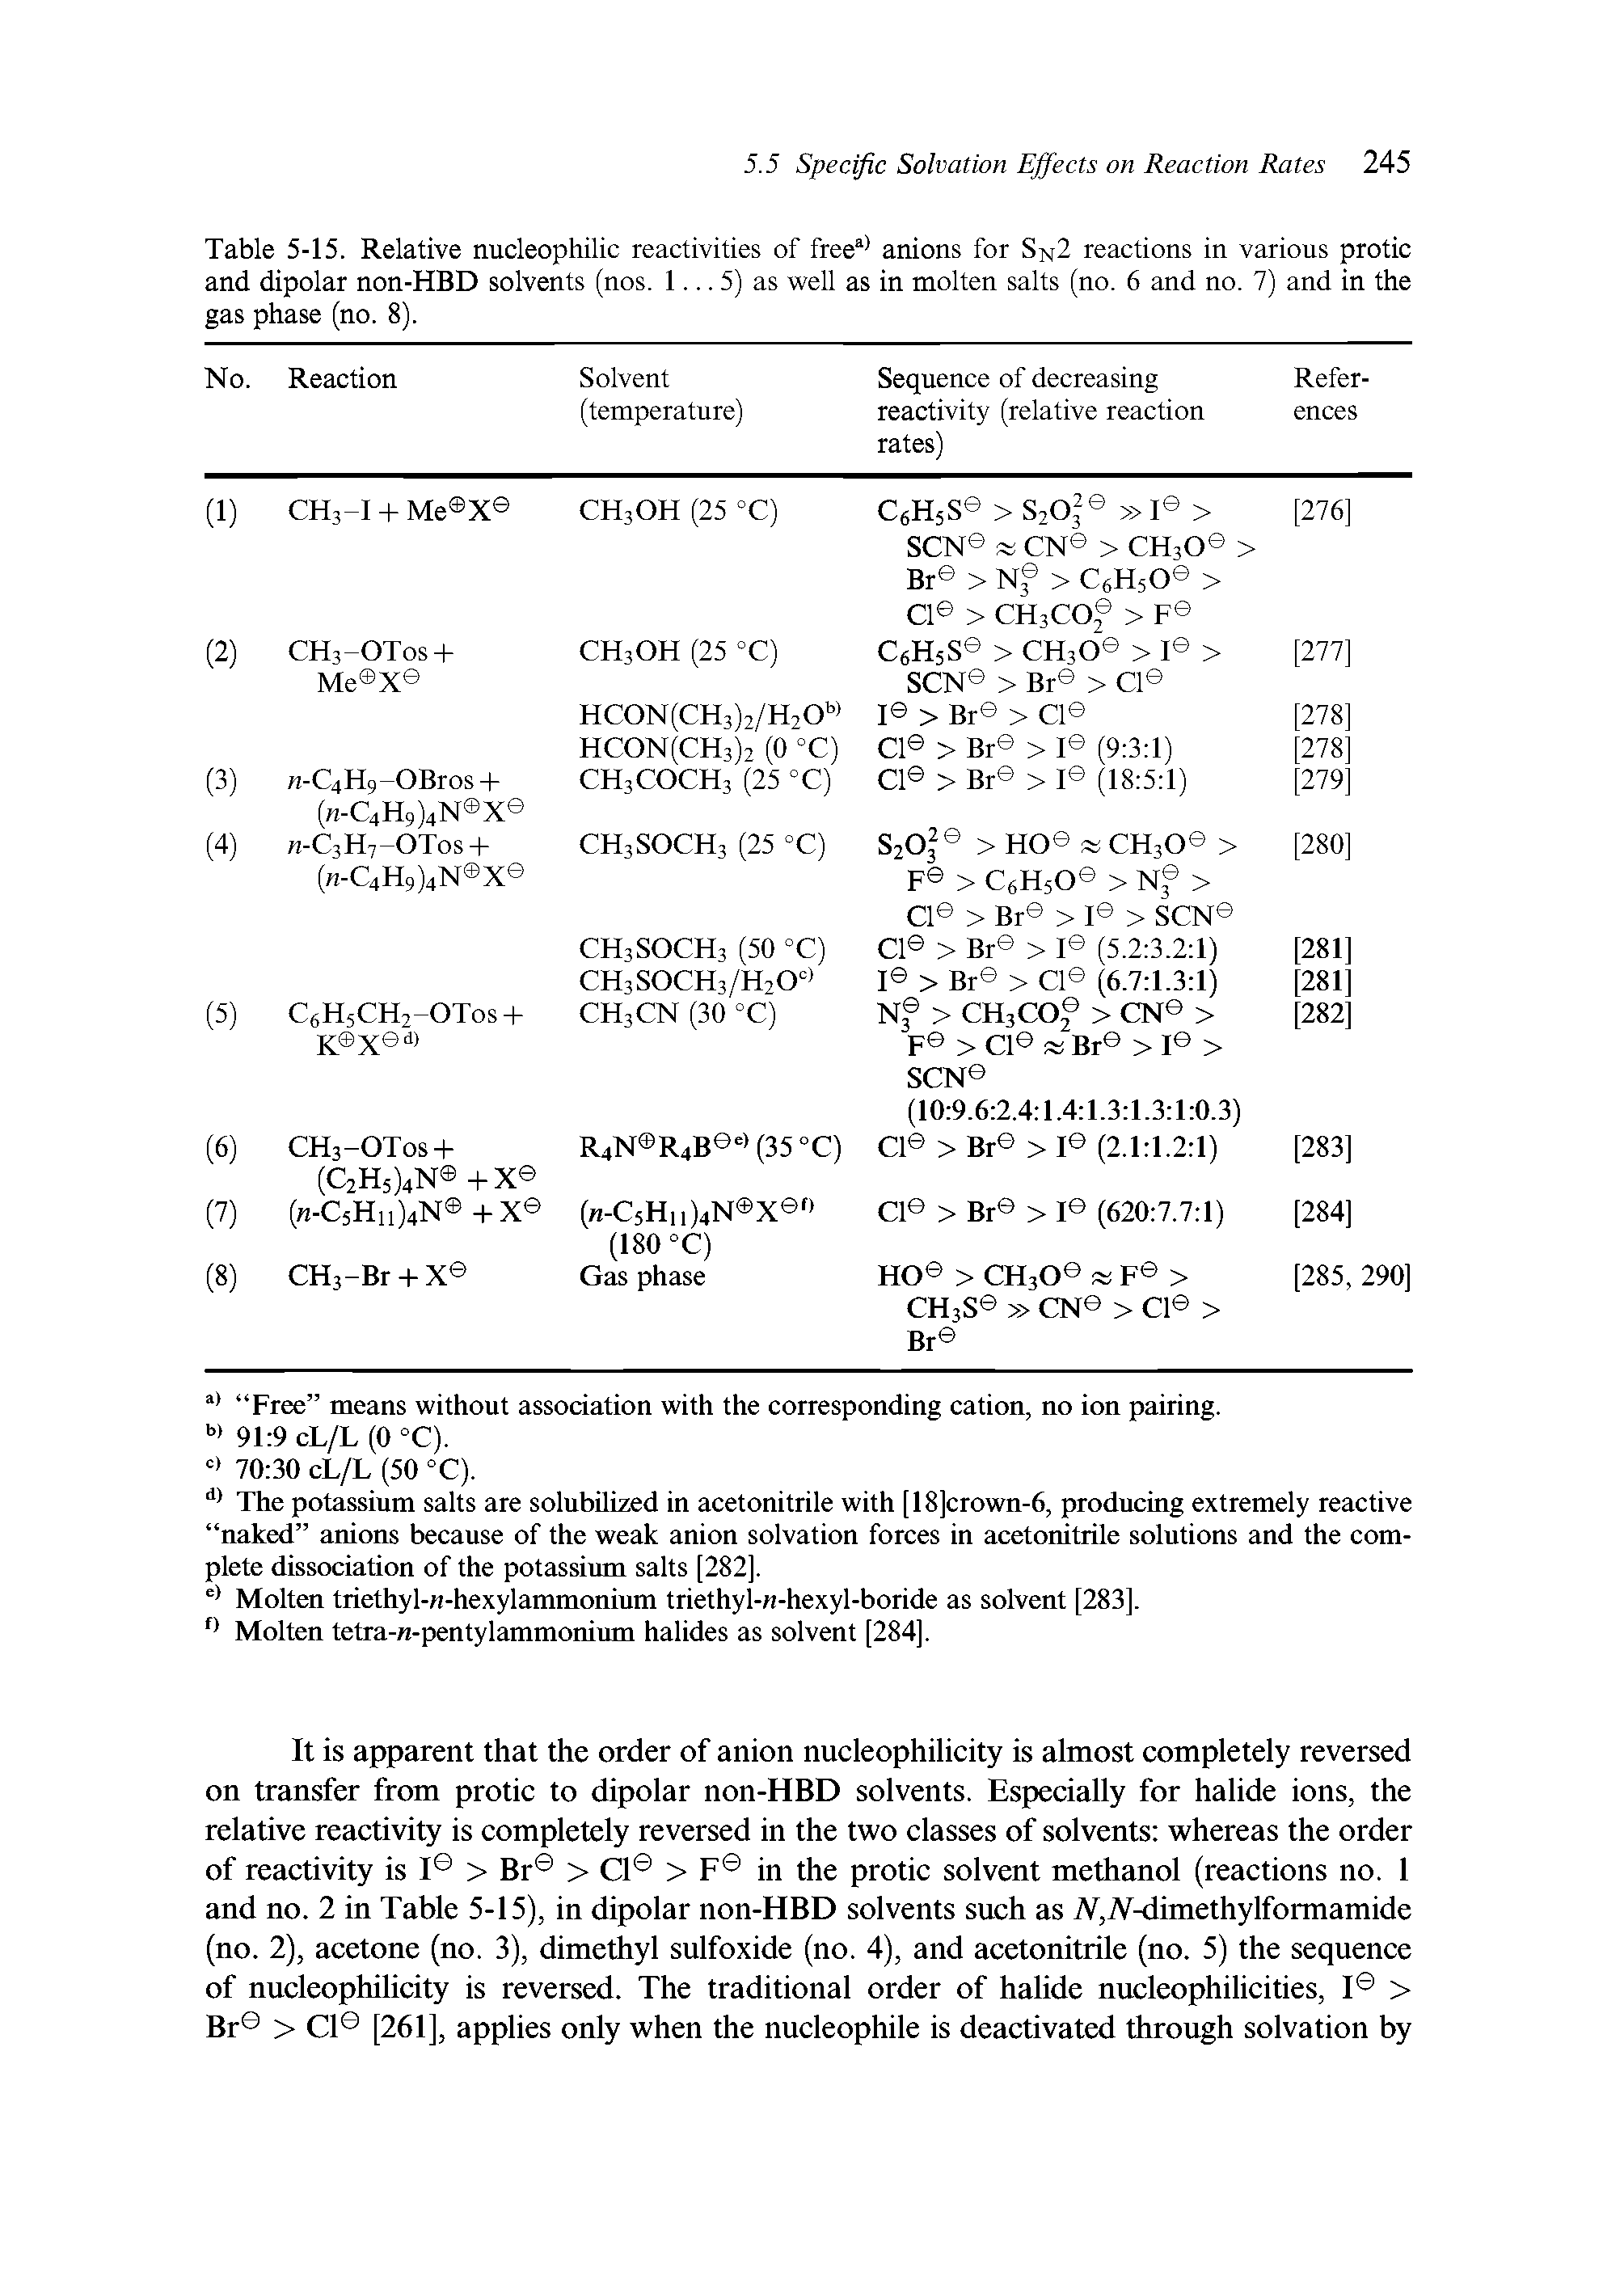 Table 5-15. Relative nucleophilic reactivities of free anions for Sn2 reactions in various protic and dipolar non-HBD solvents (nos. 1... 5) as well as in molten salts (no. 6 and no. 7) and in the gas phase (no. 8).